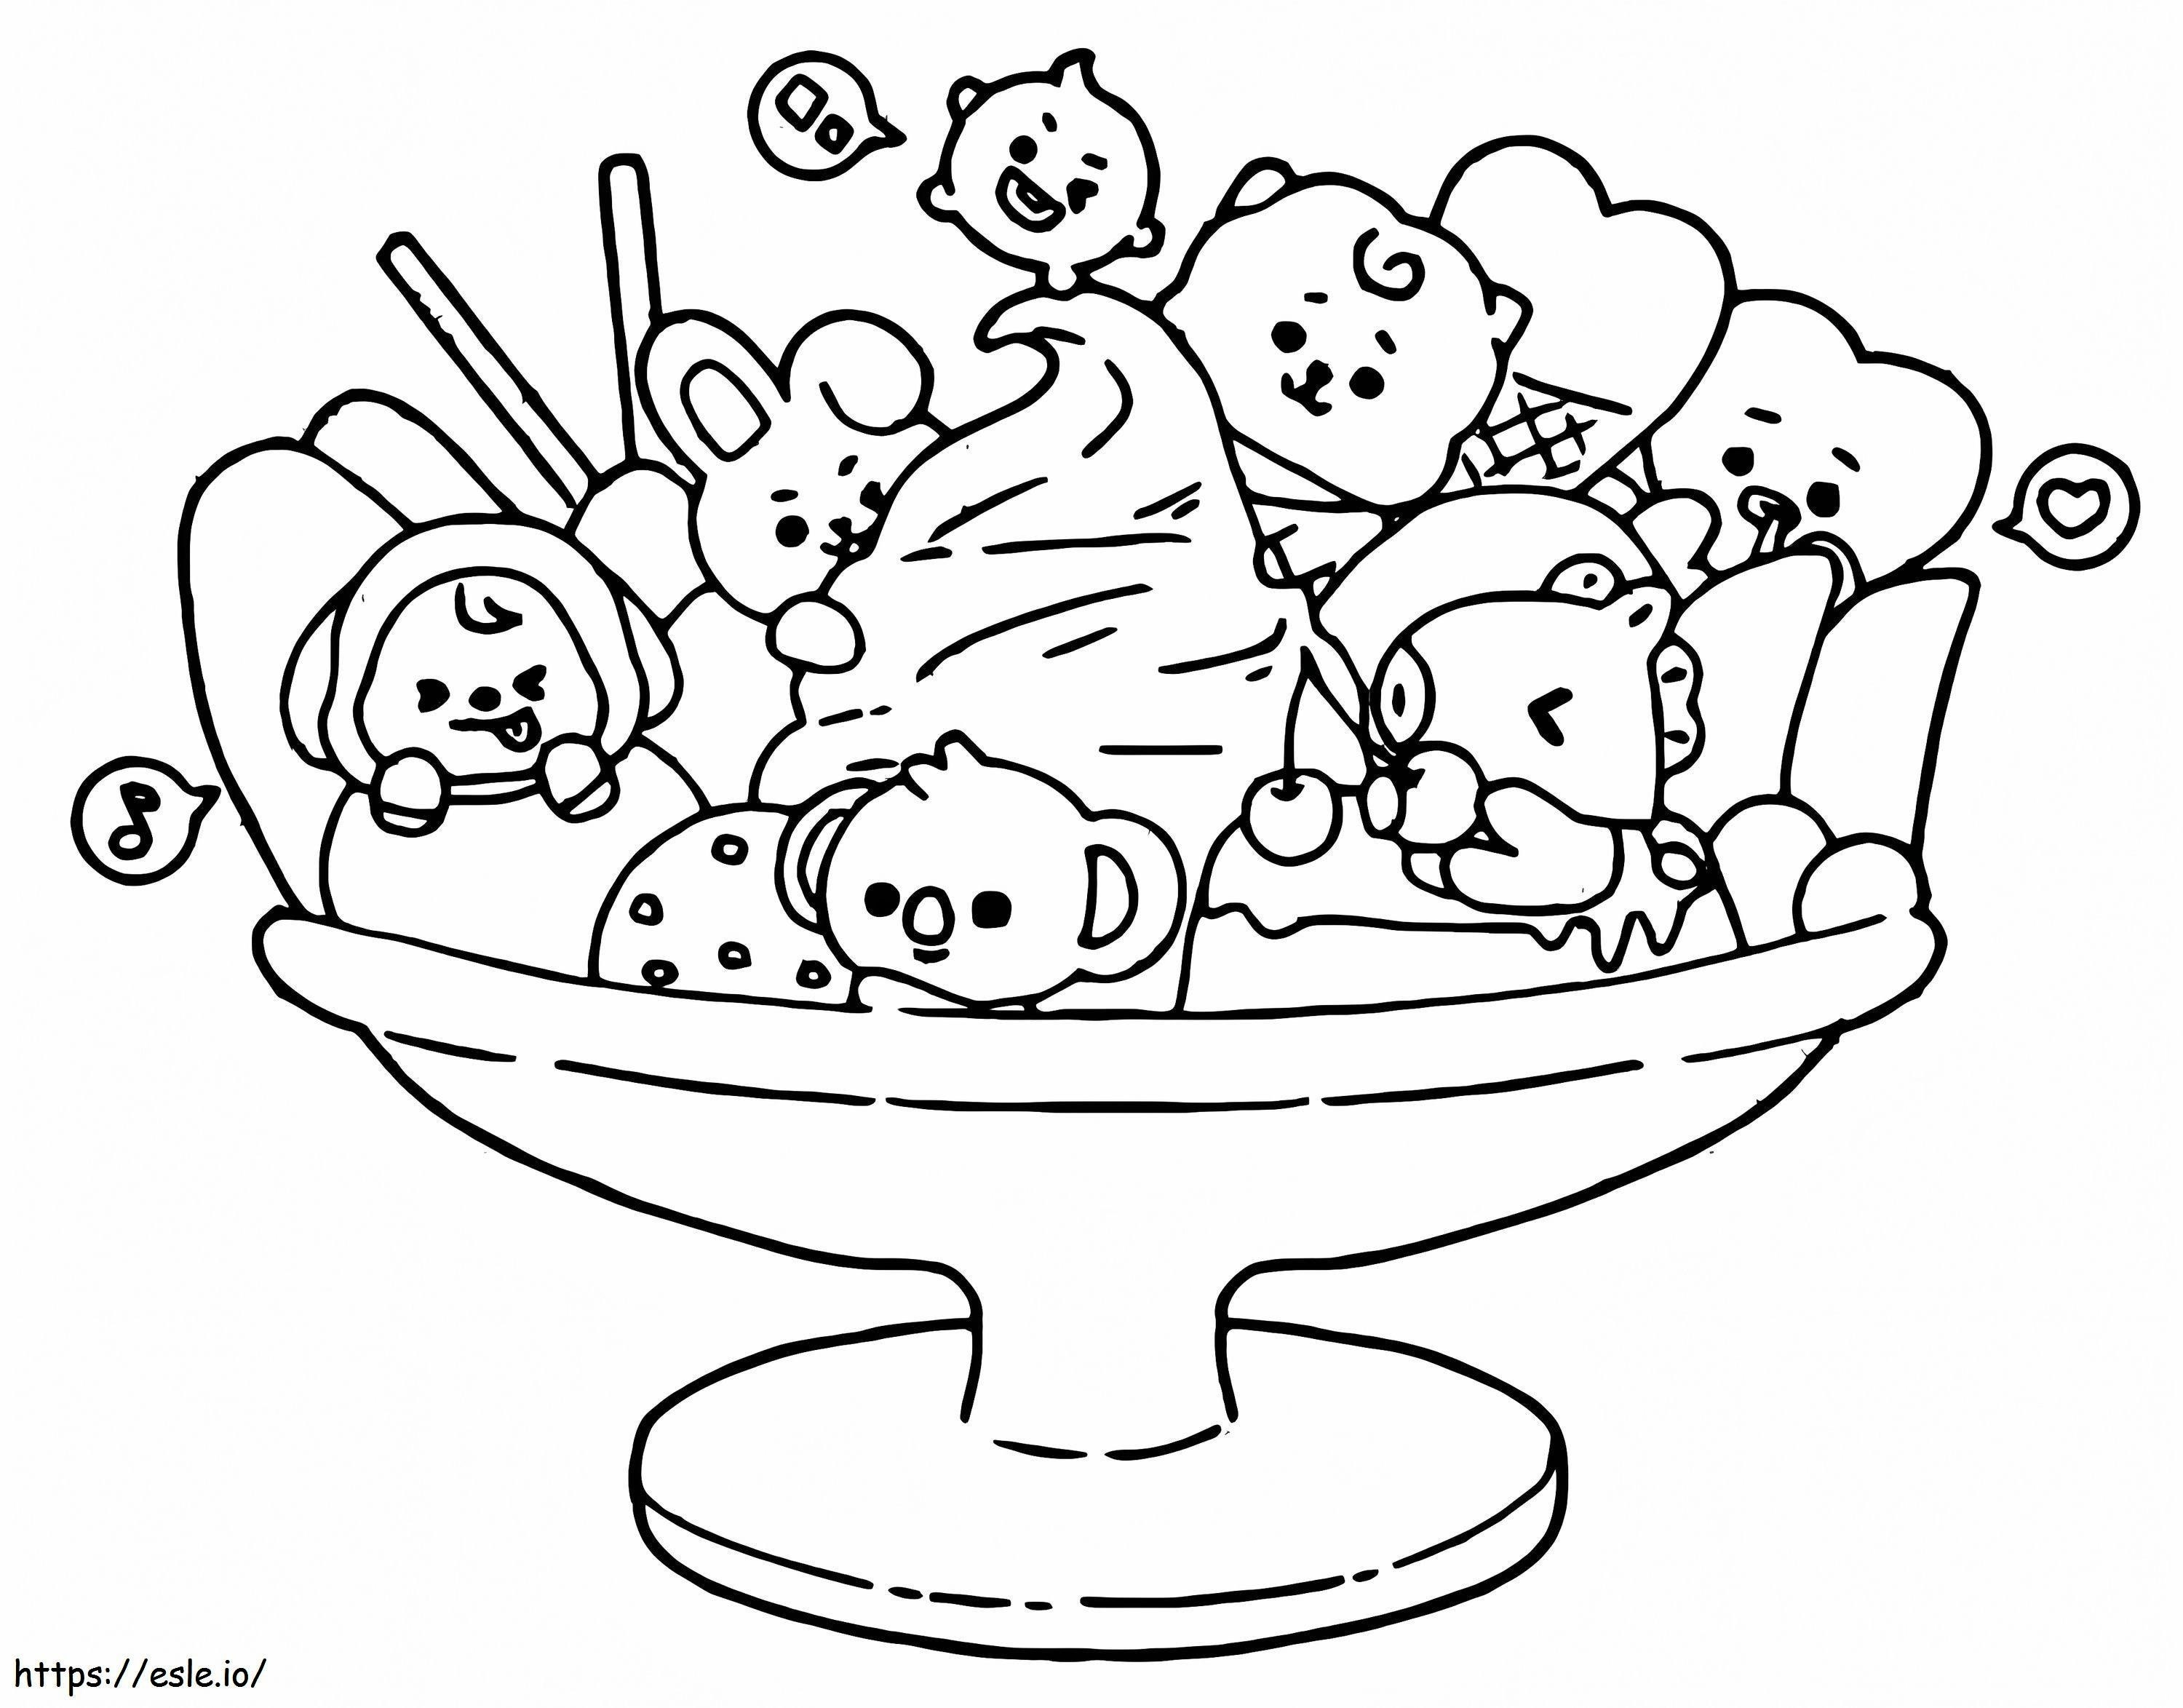 Printable BT21 coloring page